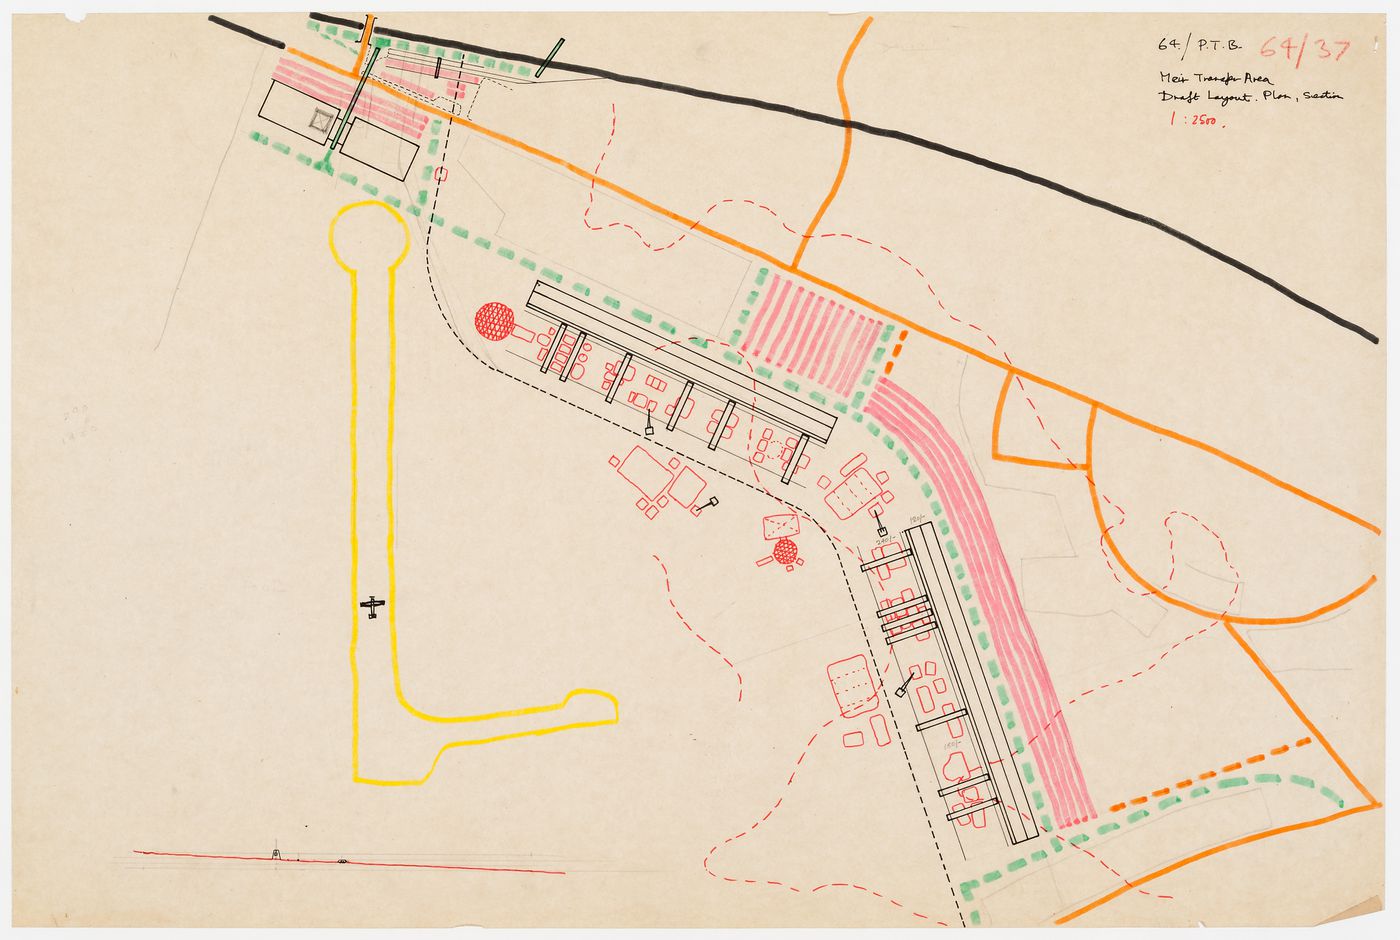 Meir Transfer Area: draft layout, plan, section (drawing from the Potteries Thinkbelt project records)